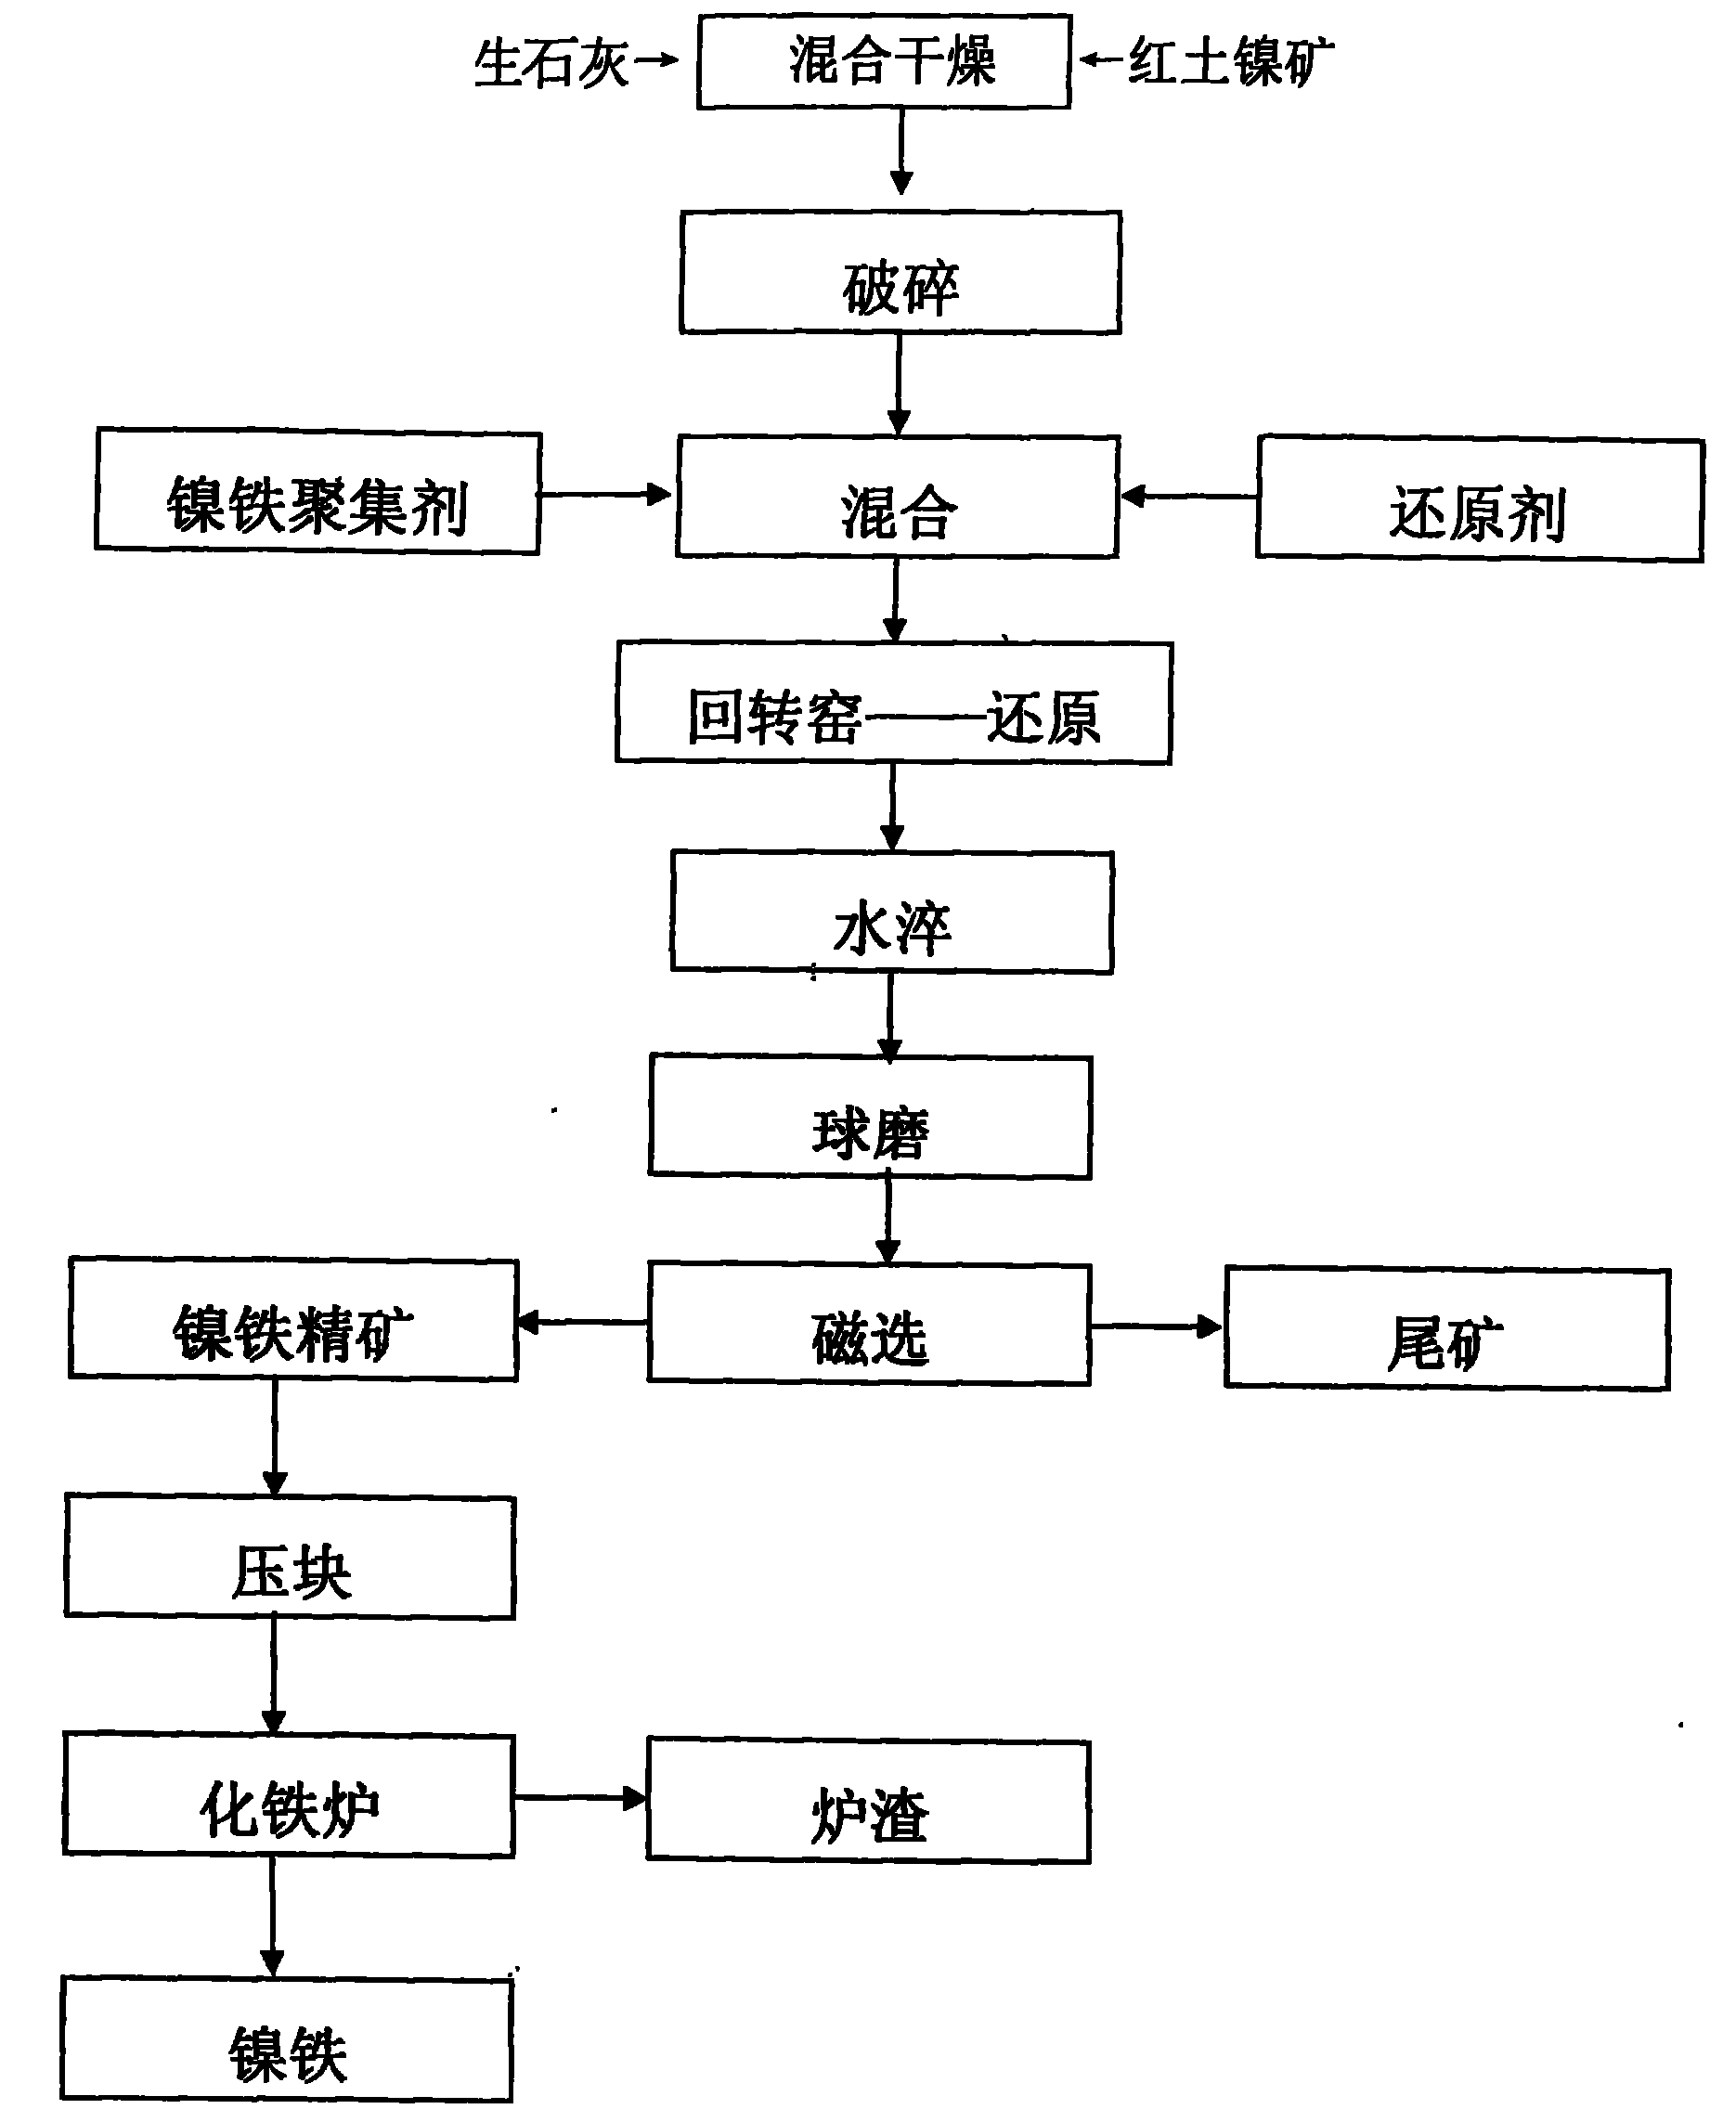 Process for producing nickel iron in rotary kiln-blast furnace by using laterite nickle mine